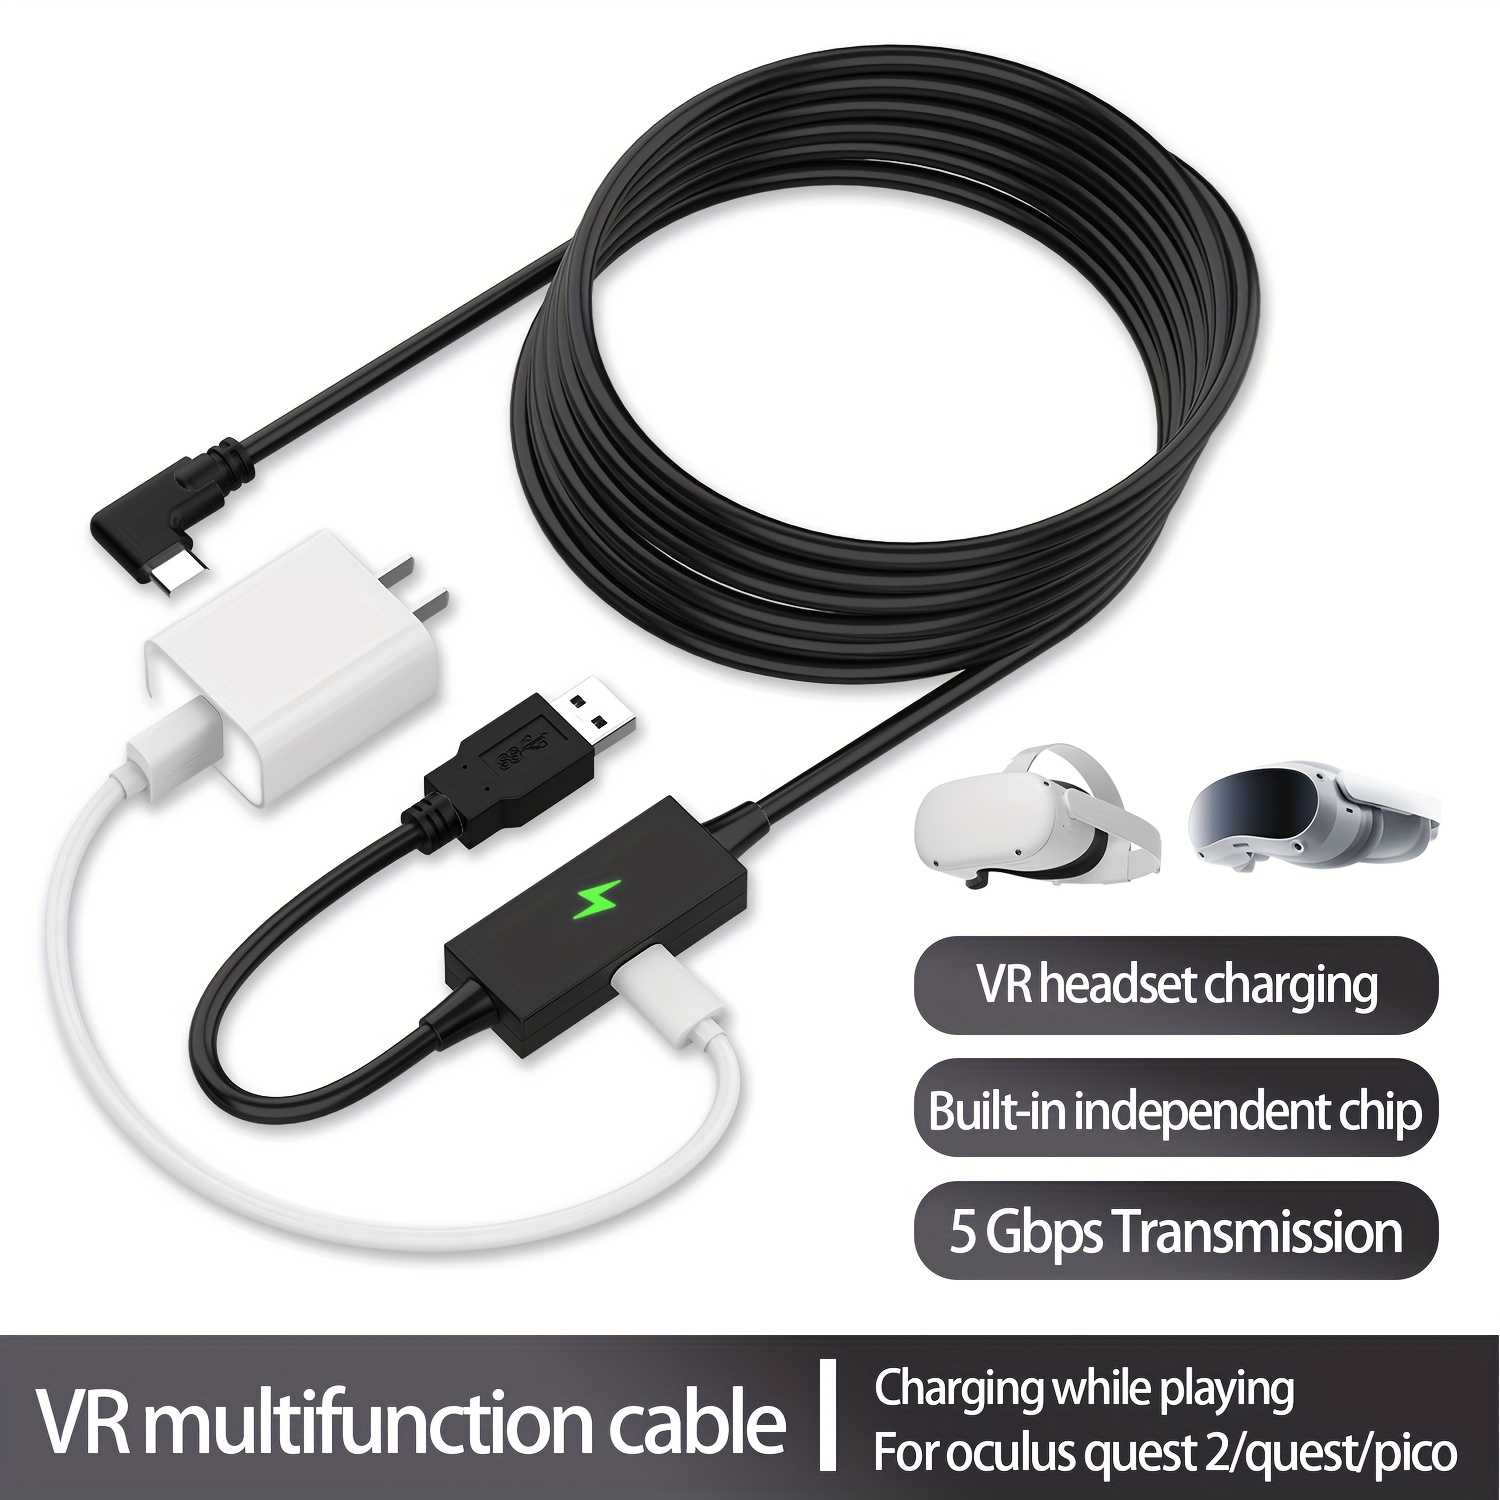 Link Cable For Oculus Quest 2, Fast Charing & Pc Data Transfer Usb C 3.2  Gen1 5gbps Pd Transfer Charging Cable Vr Headset Link Cable